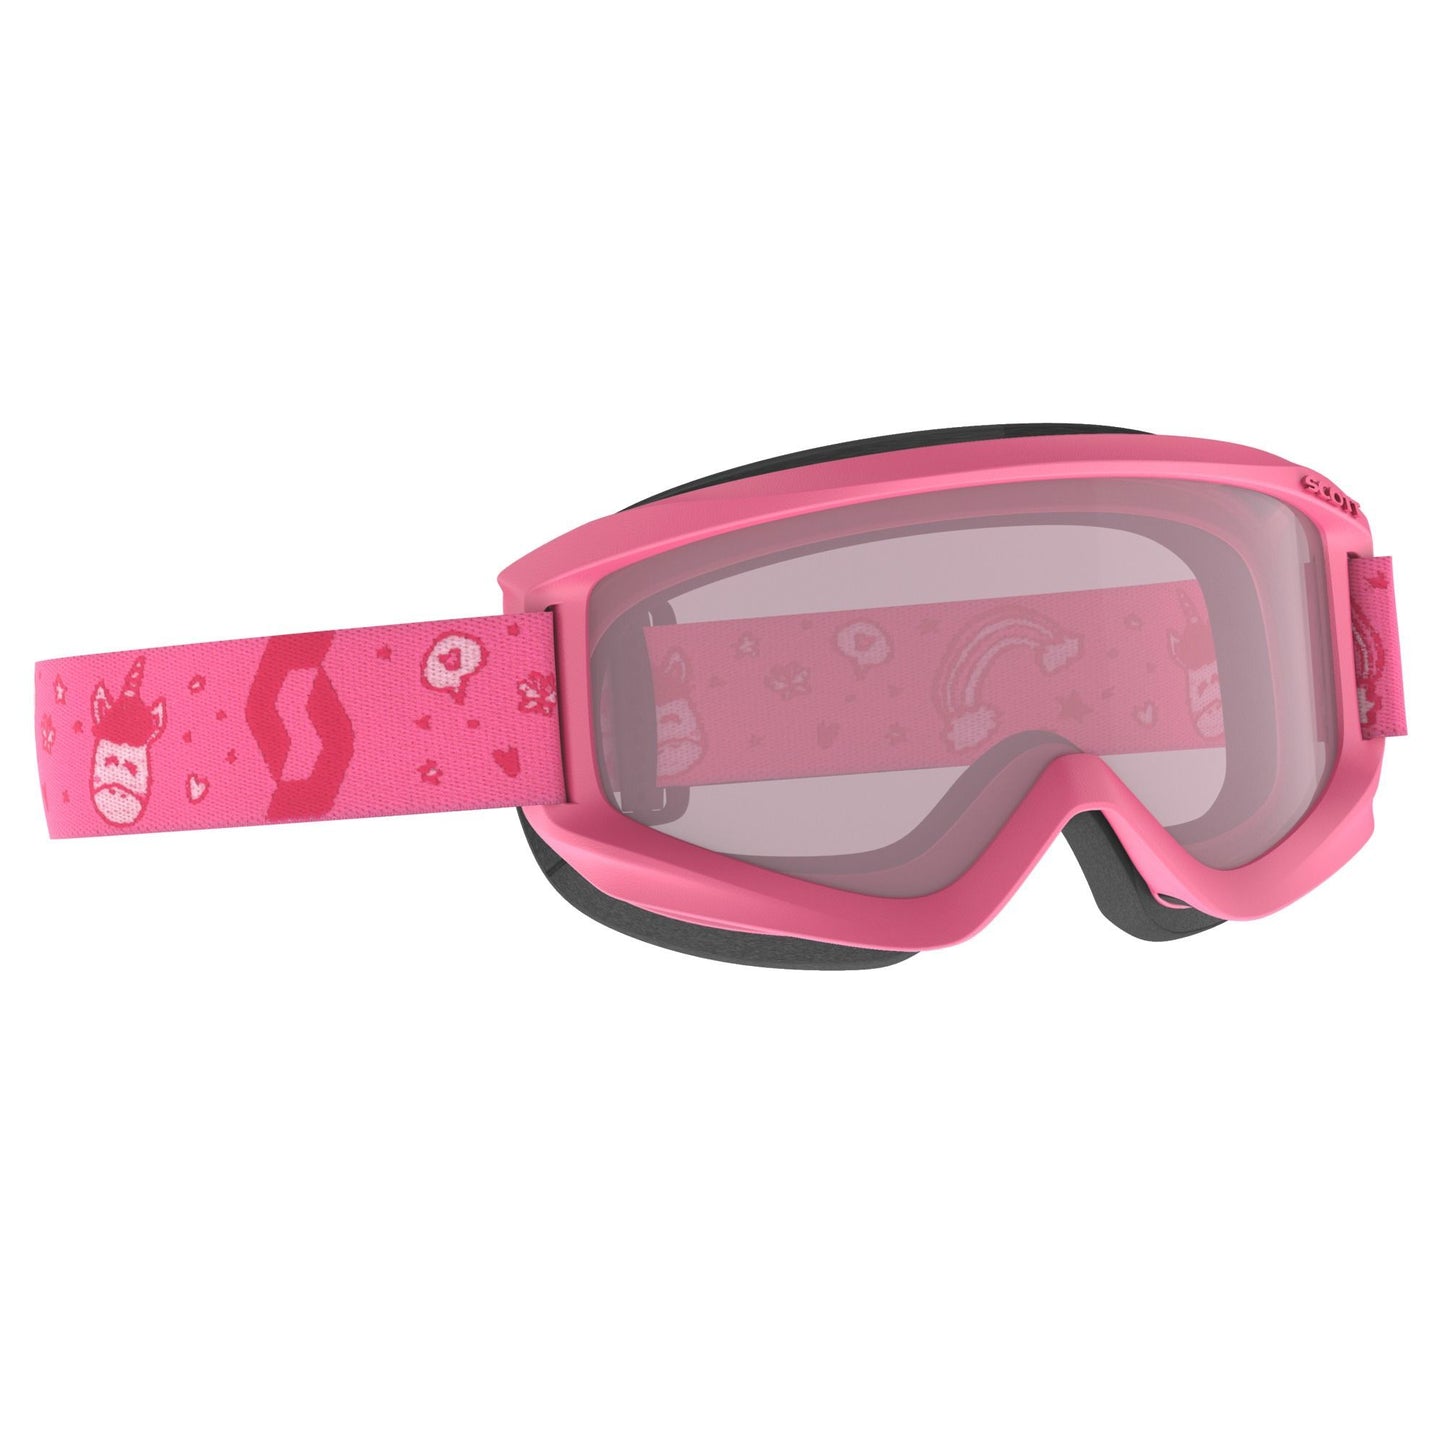 Scott Youth Jr Agent DL Snow Goggle Pink White Enhancer Snow Goggles